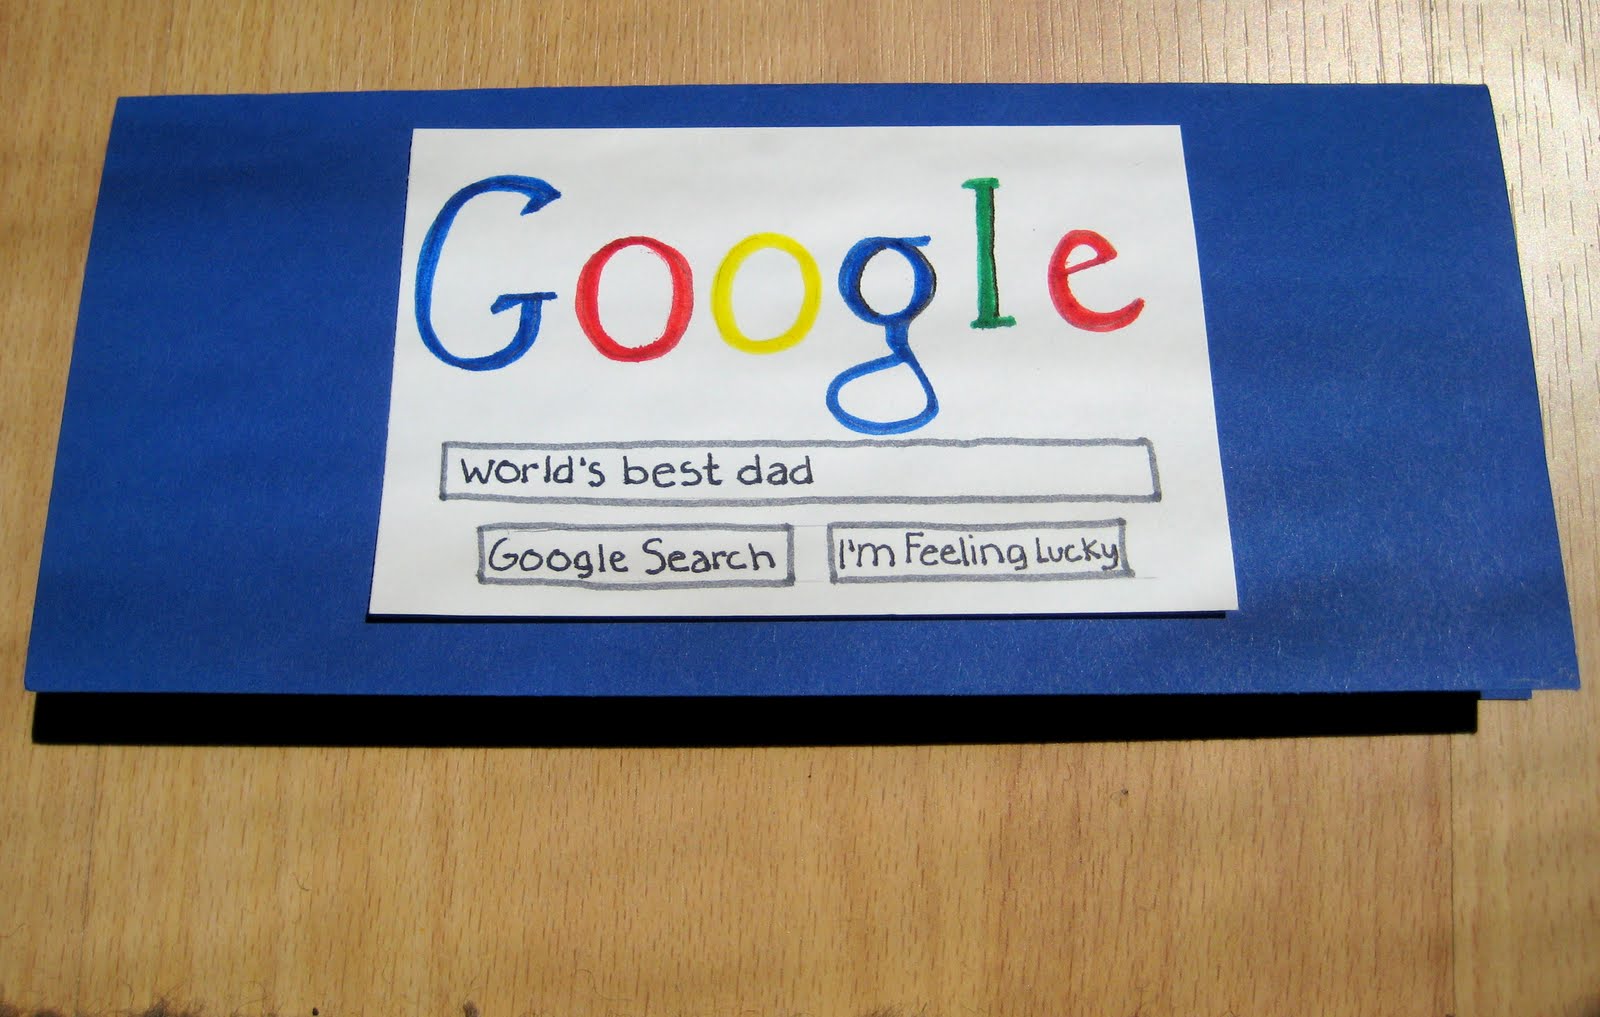 Preschool Crafts for Kids*: Father's Day Google Card Craft